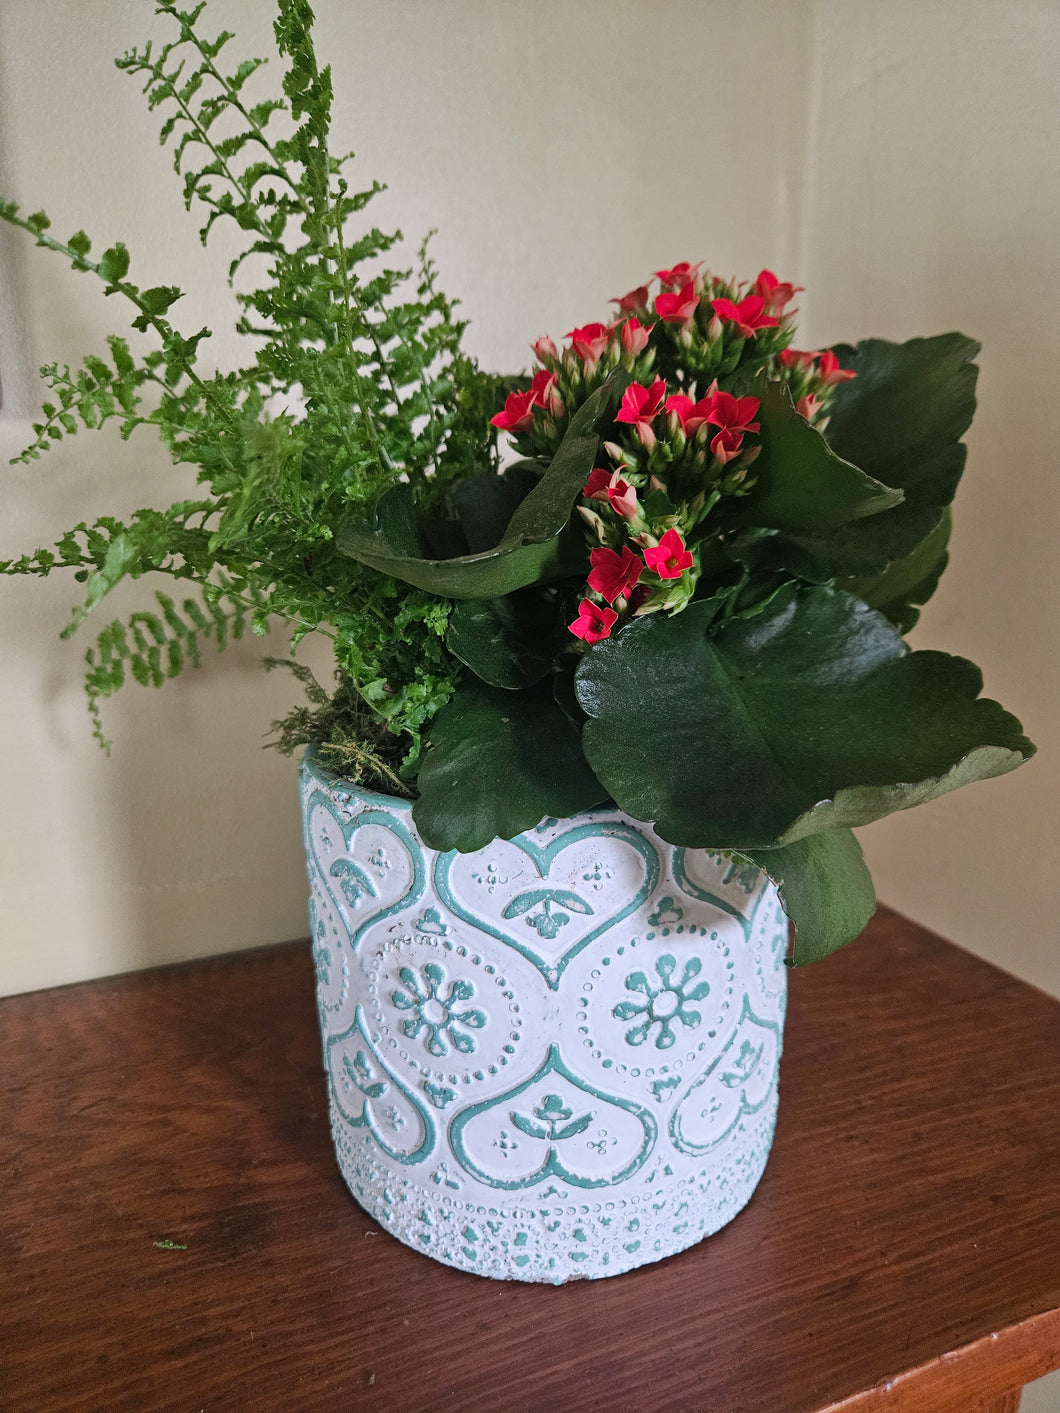 Fern & Kalanchoe in Cement Container